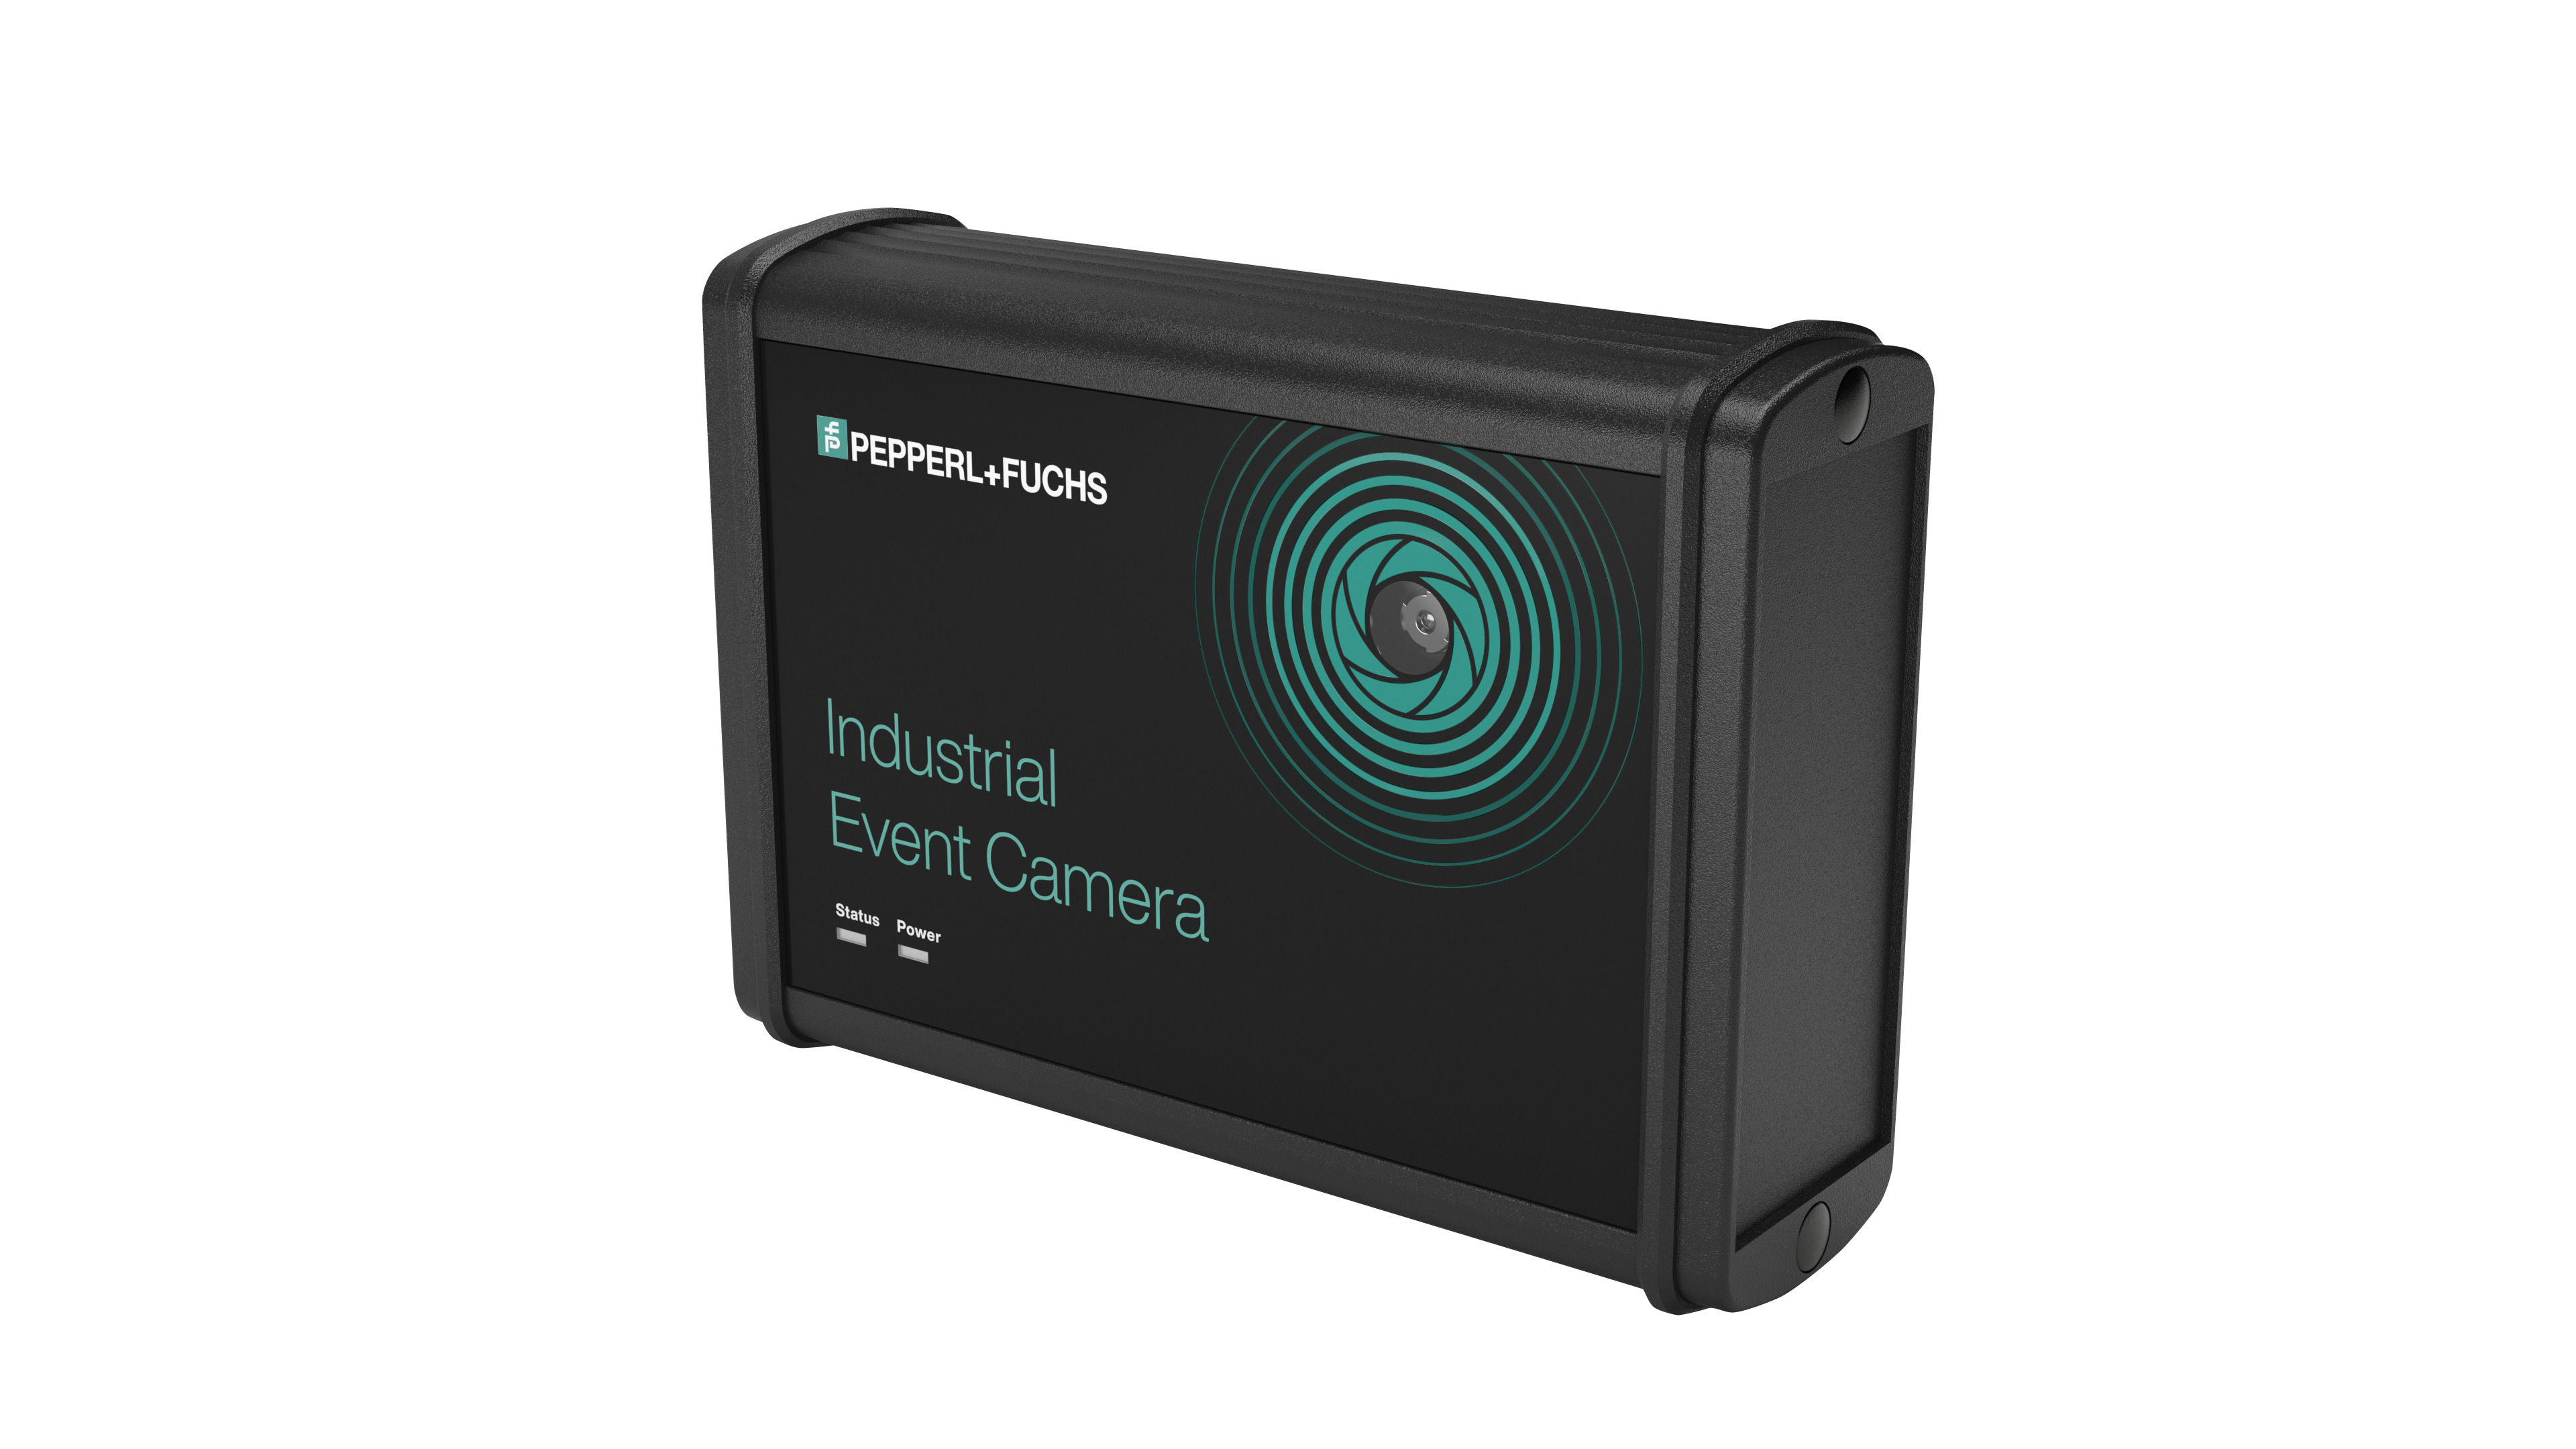 Pepperl+Fuchs Industrial Event Camera